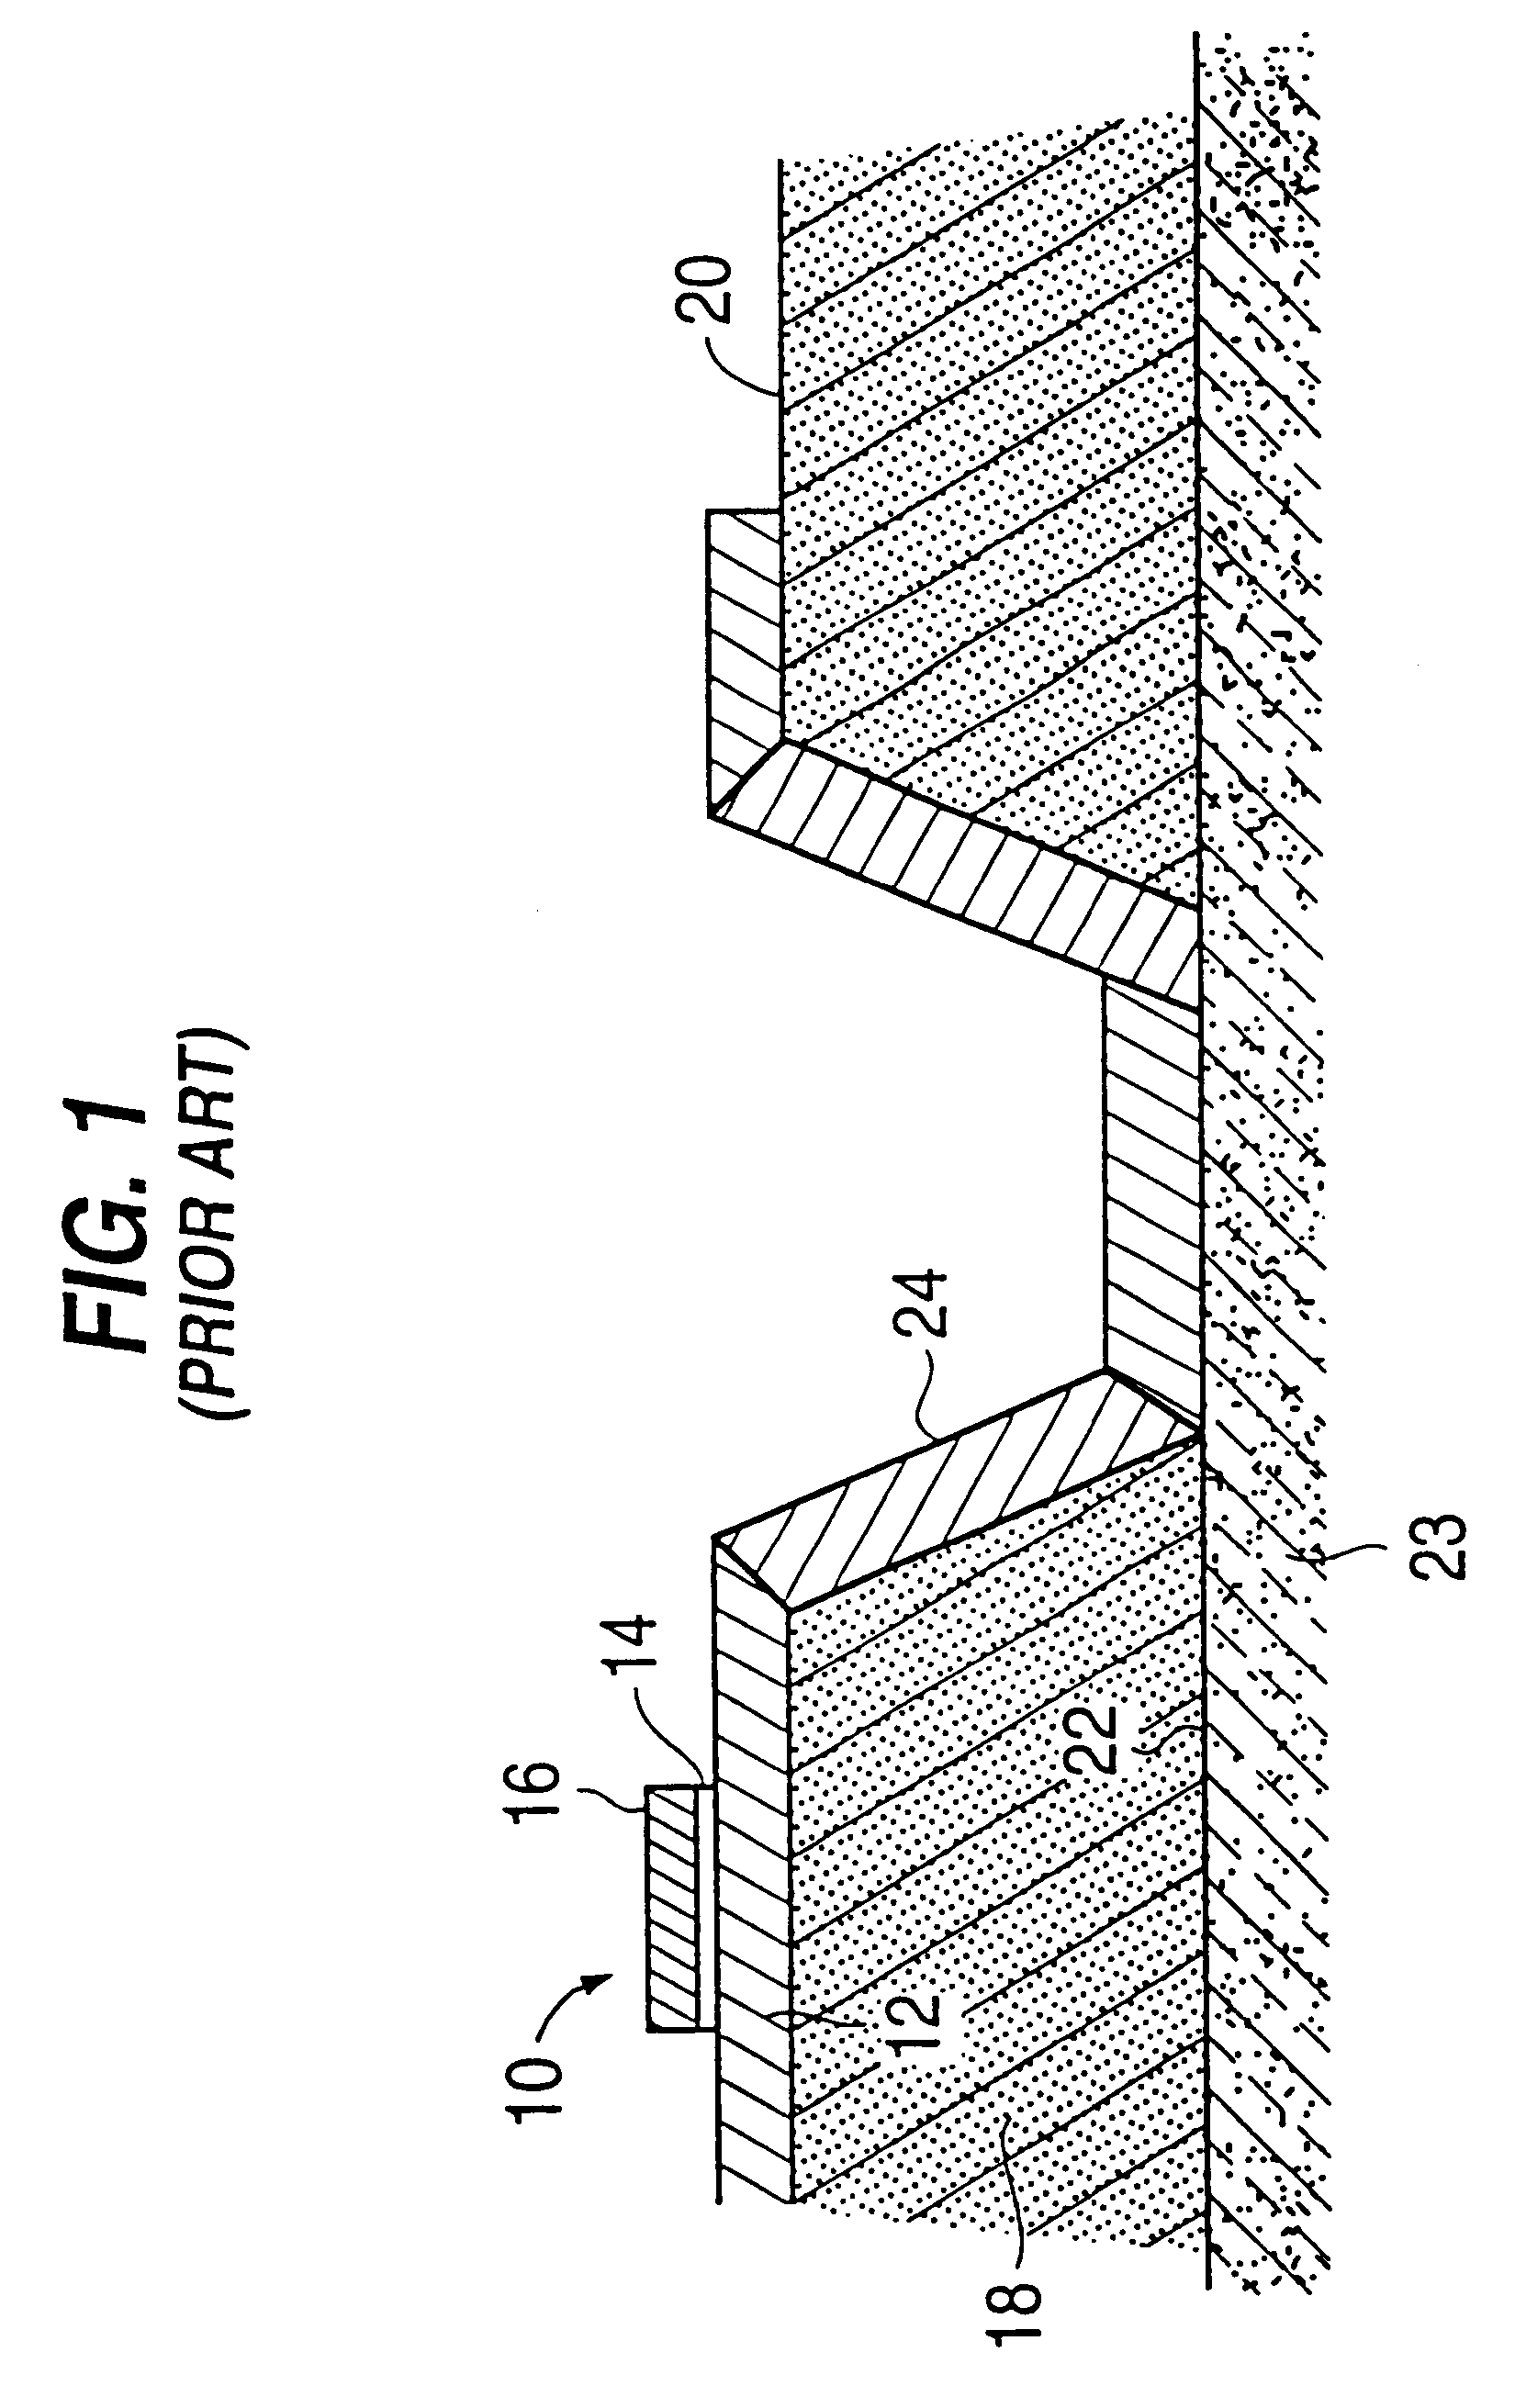 Process for reducing surface roughness of superconductor integrated circuit having a ground plane of niobium nitride of improved smoothness